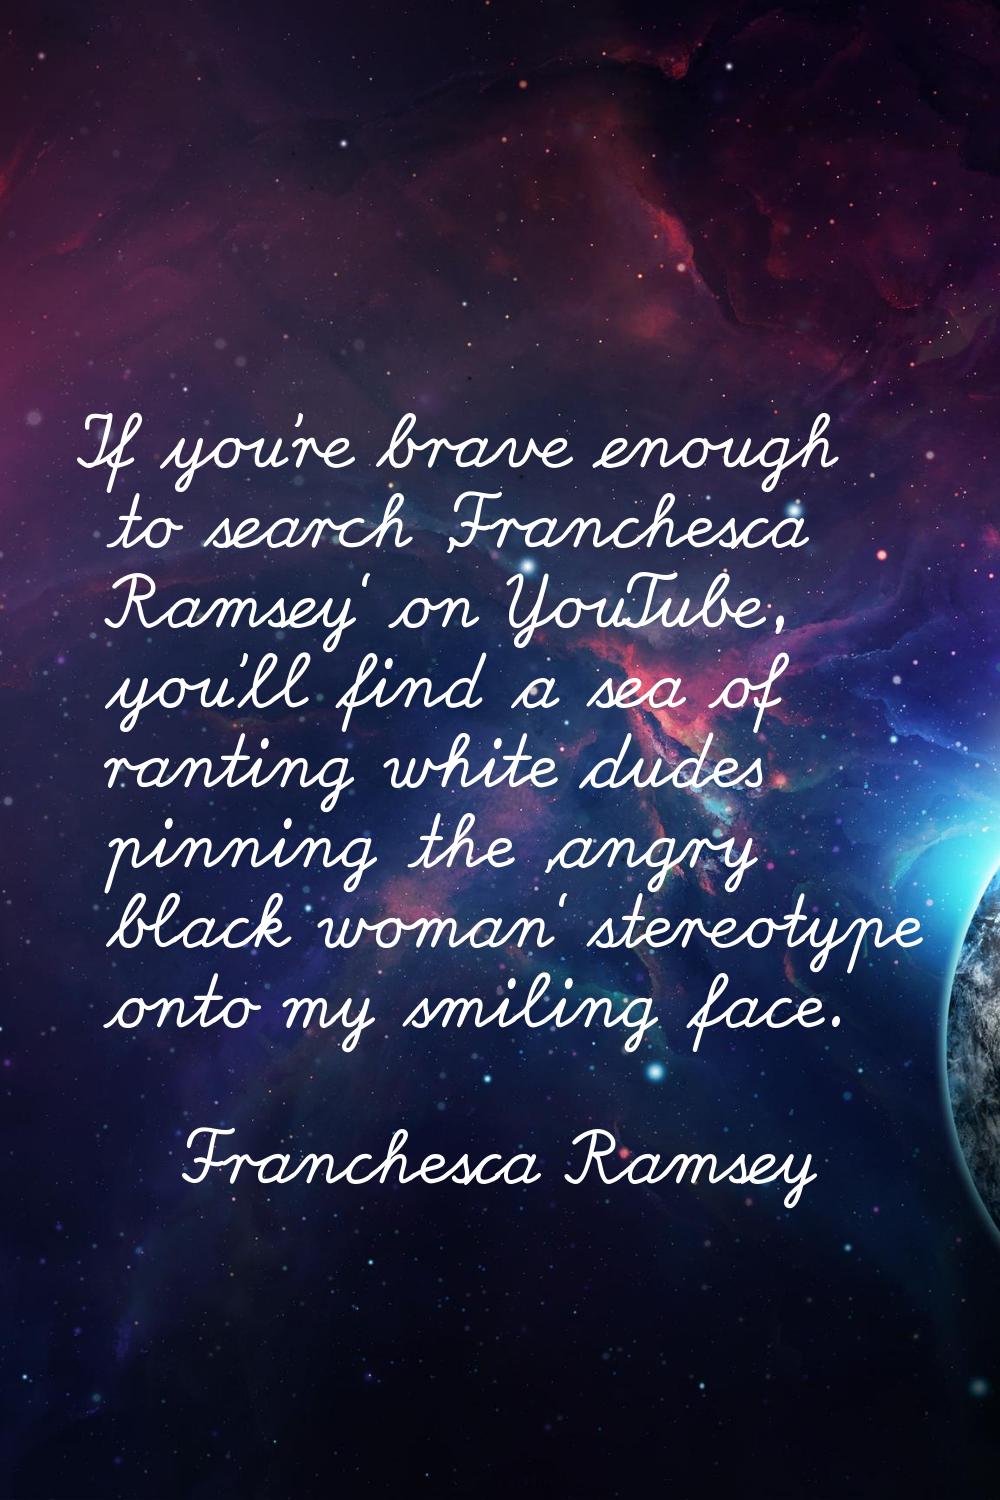 If you're brave enough to search 'Franchesca Ramsey' on YouTube, you'll find a sea of ranting white